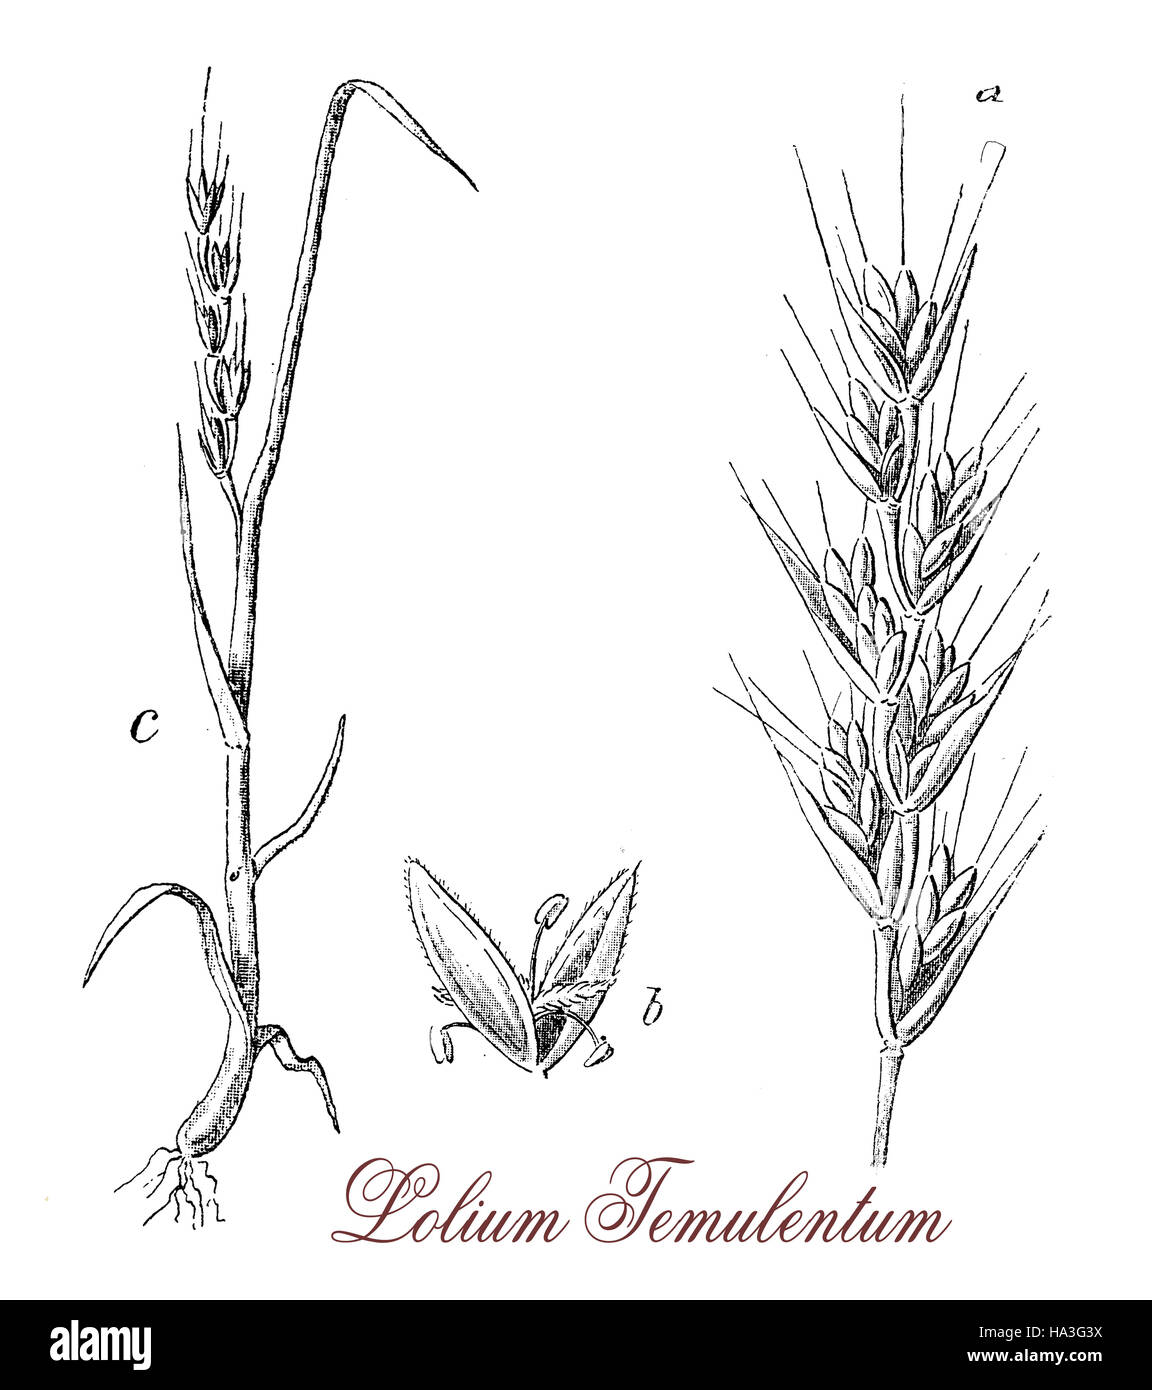 Lolium temulentum or Poison darnel is a weed very similar to wheat, but the ears are different and the grains are purple. It can easily infected by funguses and becomes toxic. Mithridates was supposed to used darnel every day to render himself immune to poisoning. Stock Photo